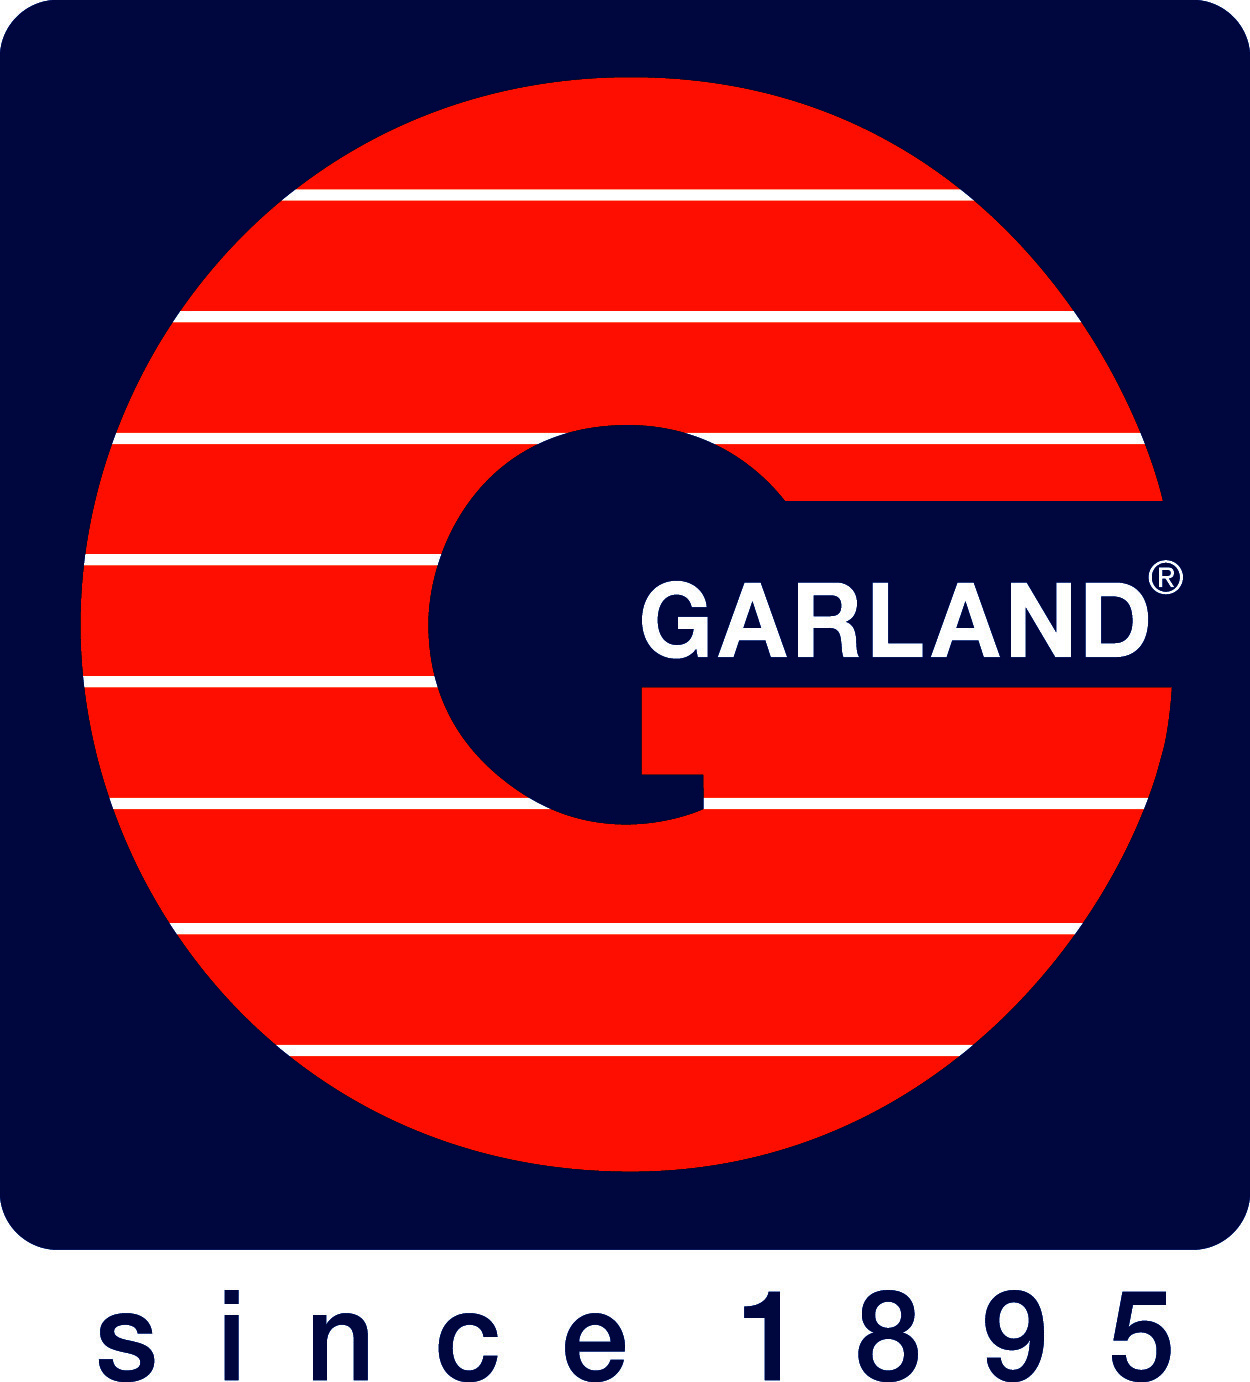 Garland Receives Regional Award for its Commitment to Manufacturing Excellence